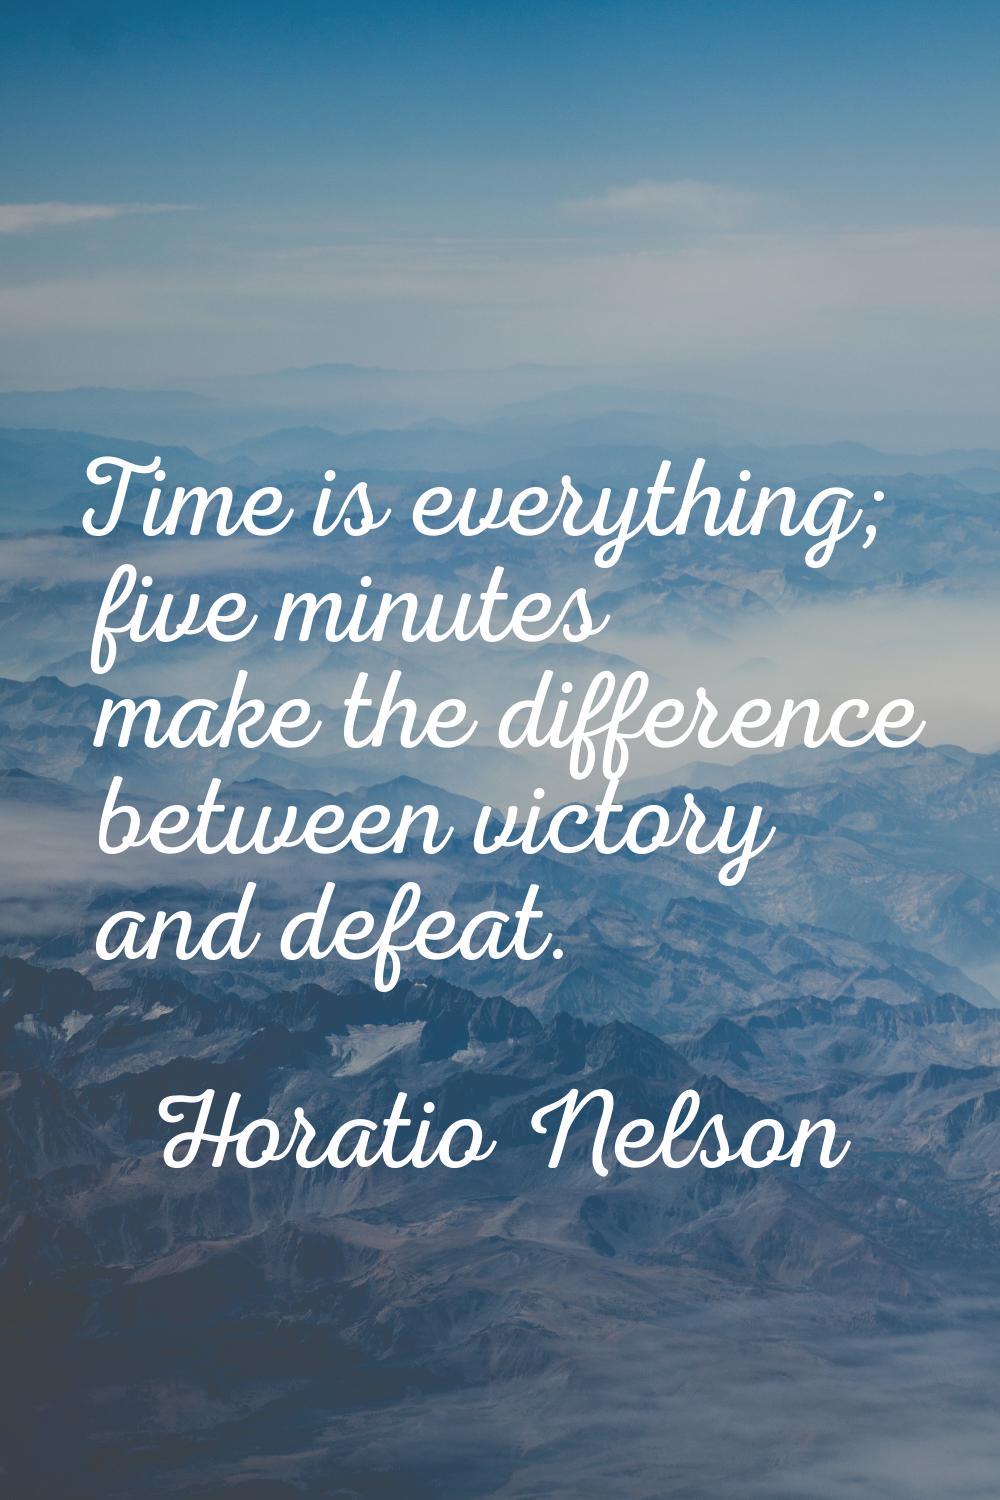 Time is everything; five minutes make the difference between victory and defeat.